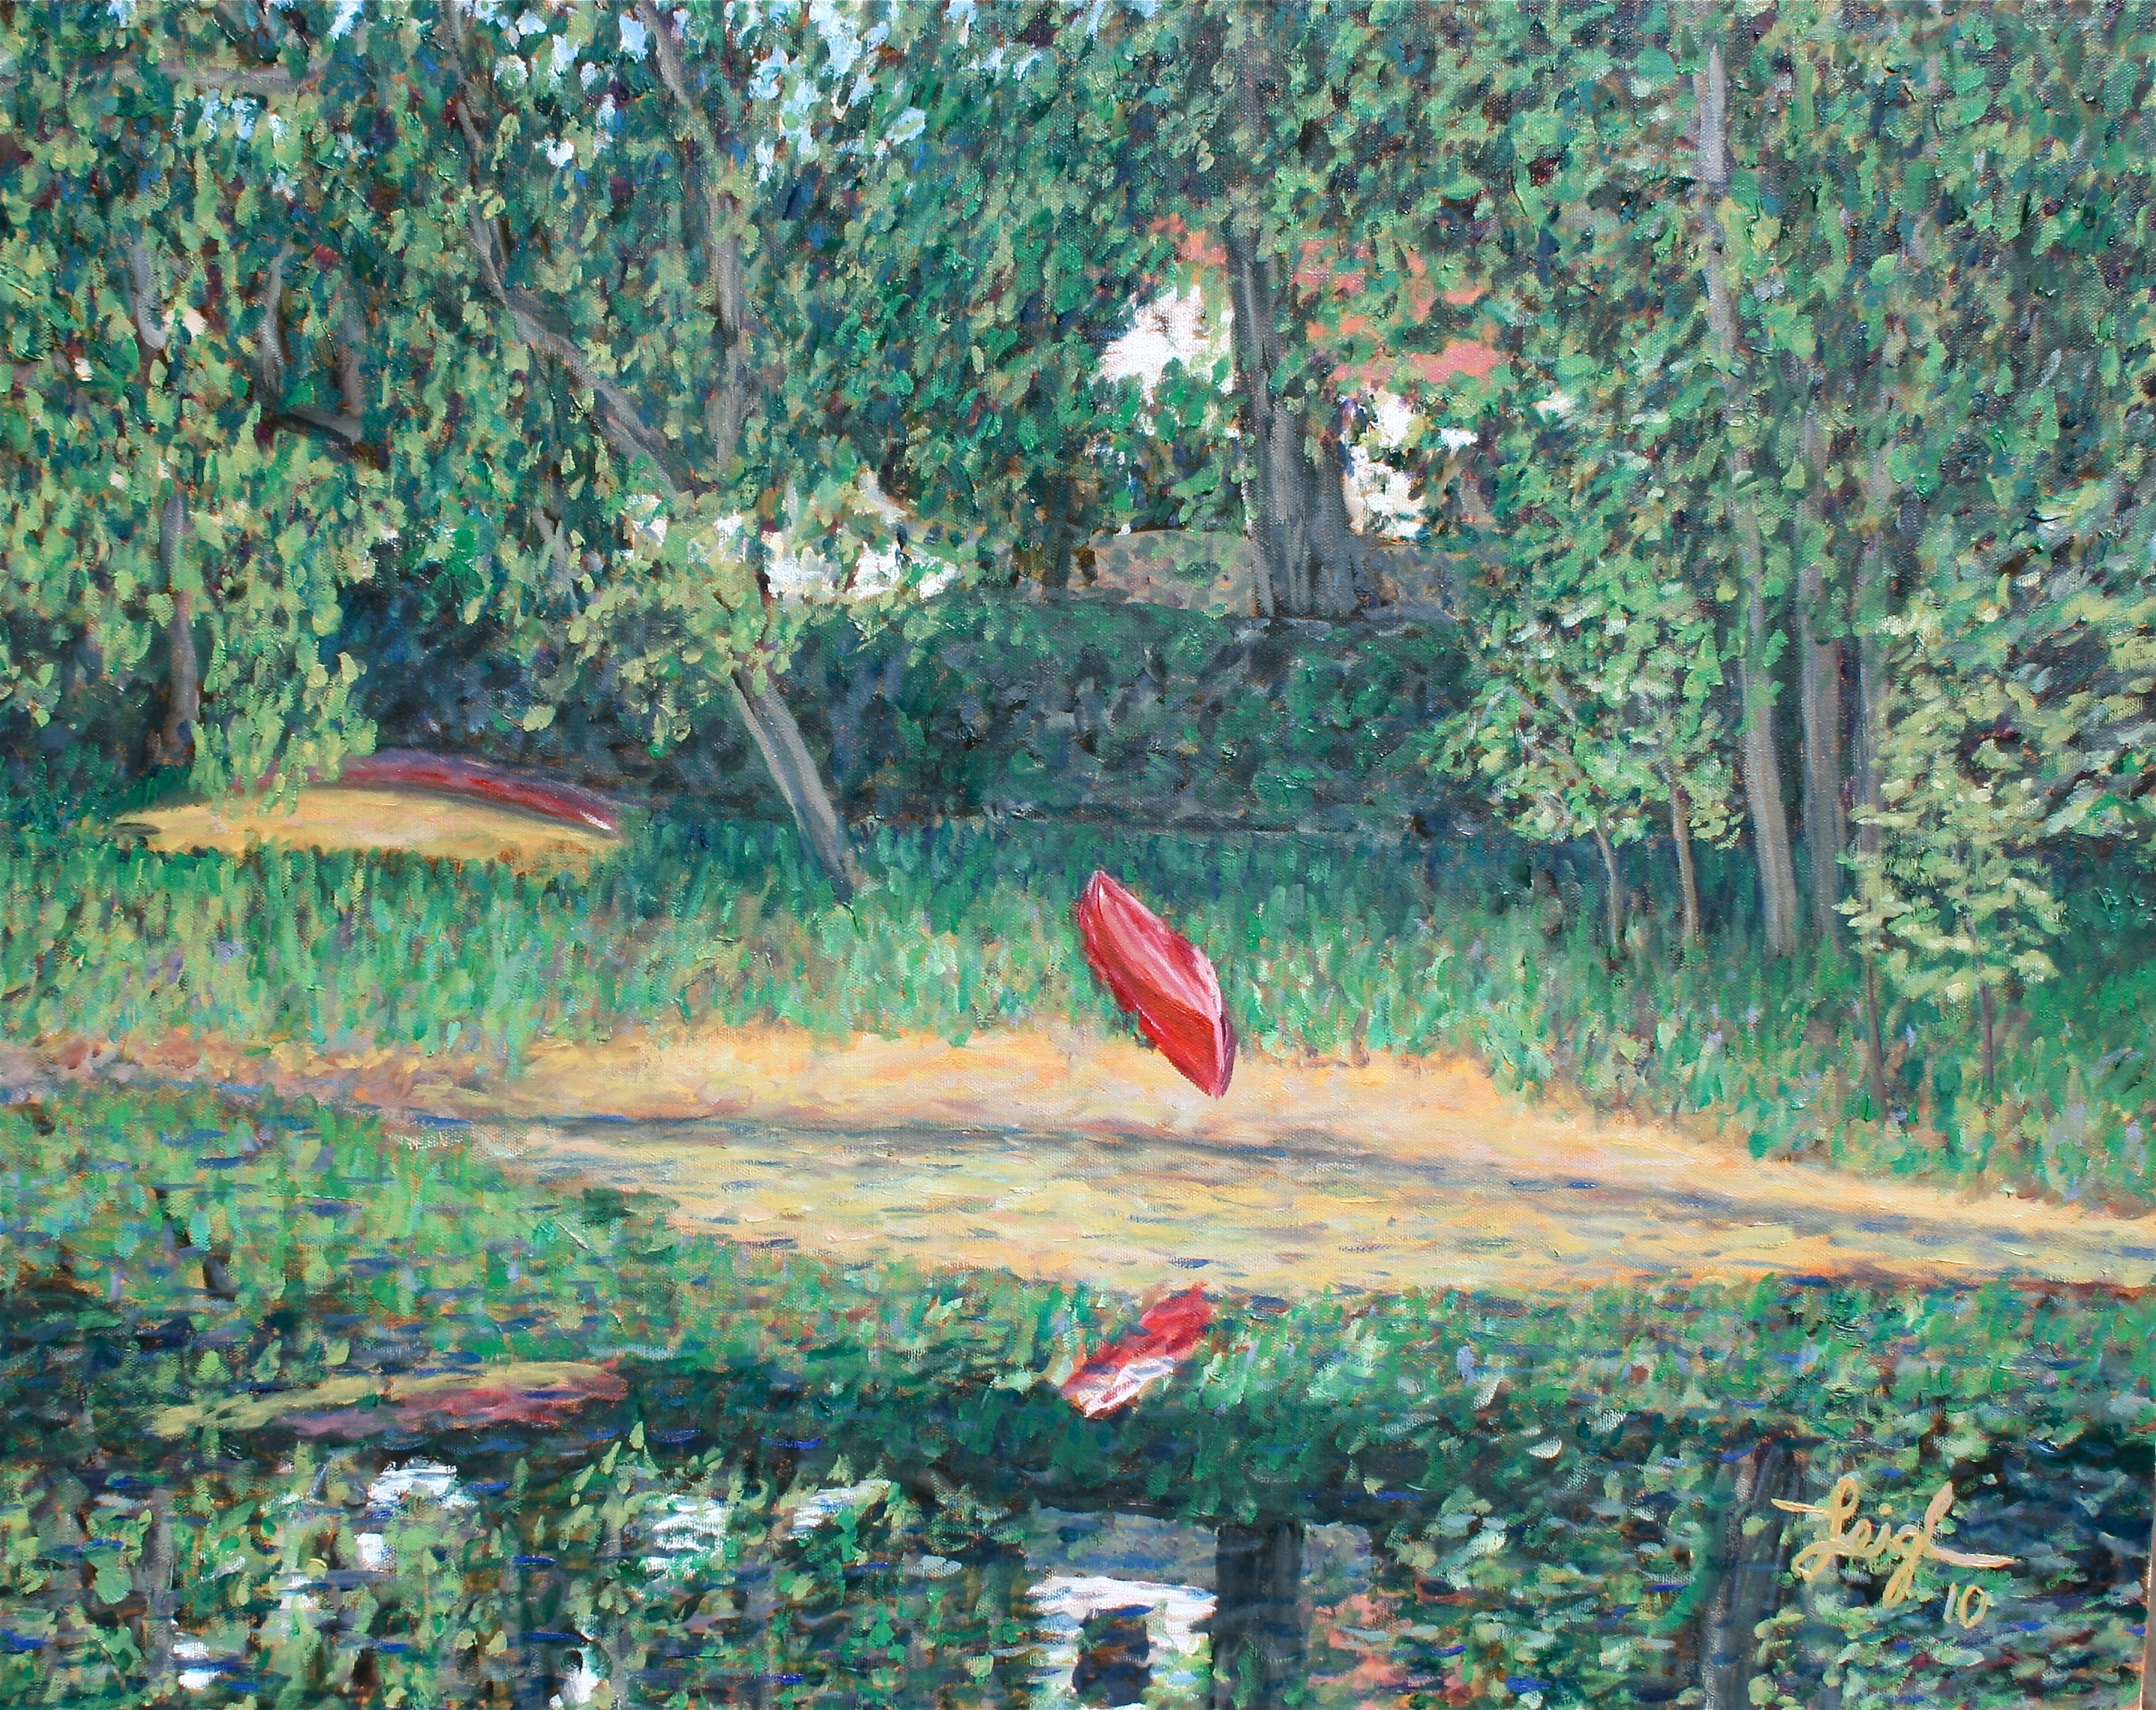 Red Canoe in Maine  ~  
Auction for PAVE, Tacoma, WA 
2010  •  30 x 24